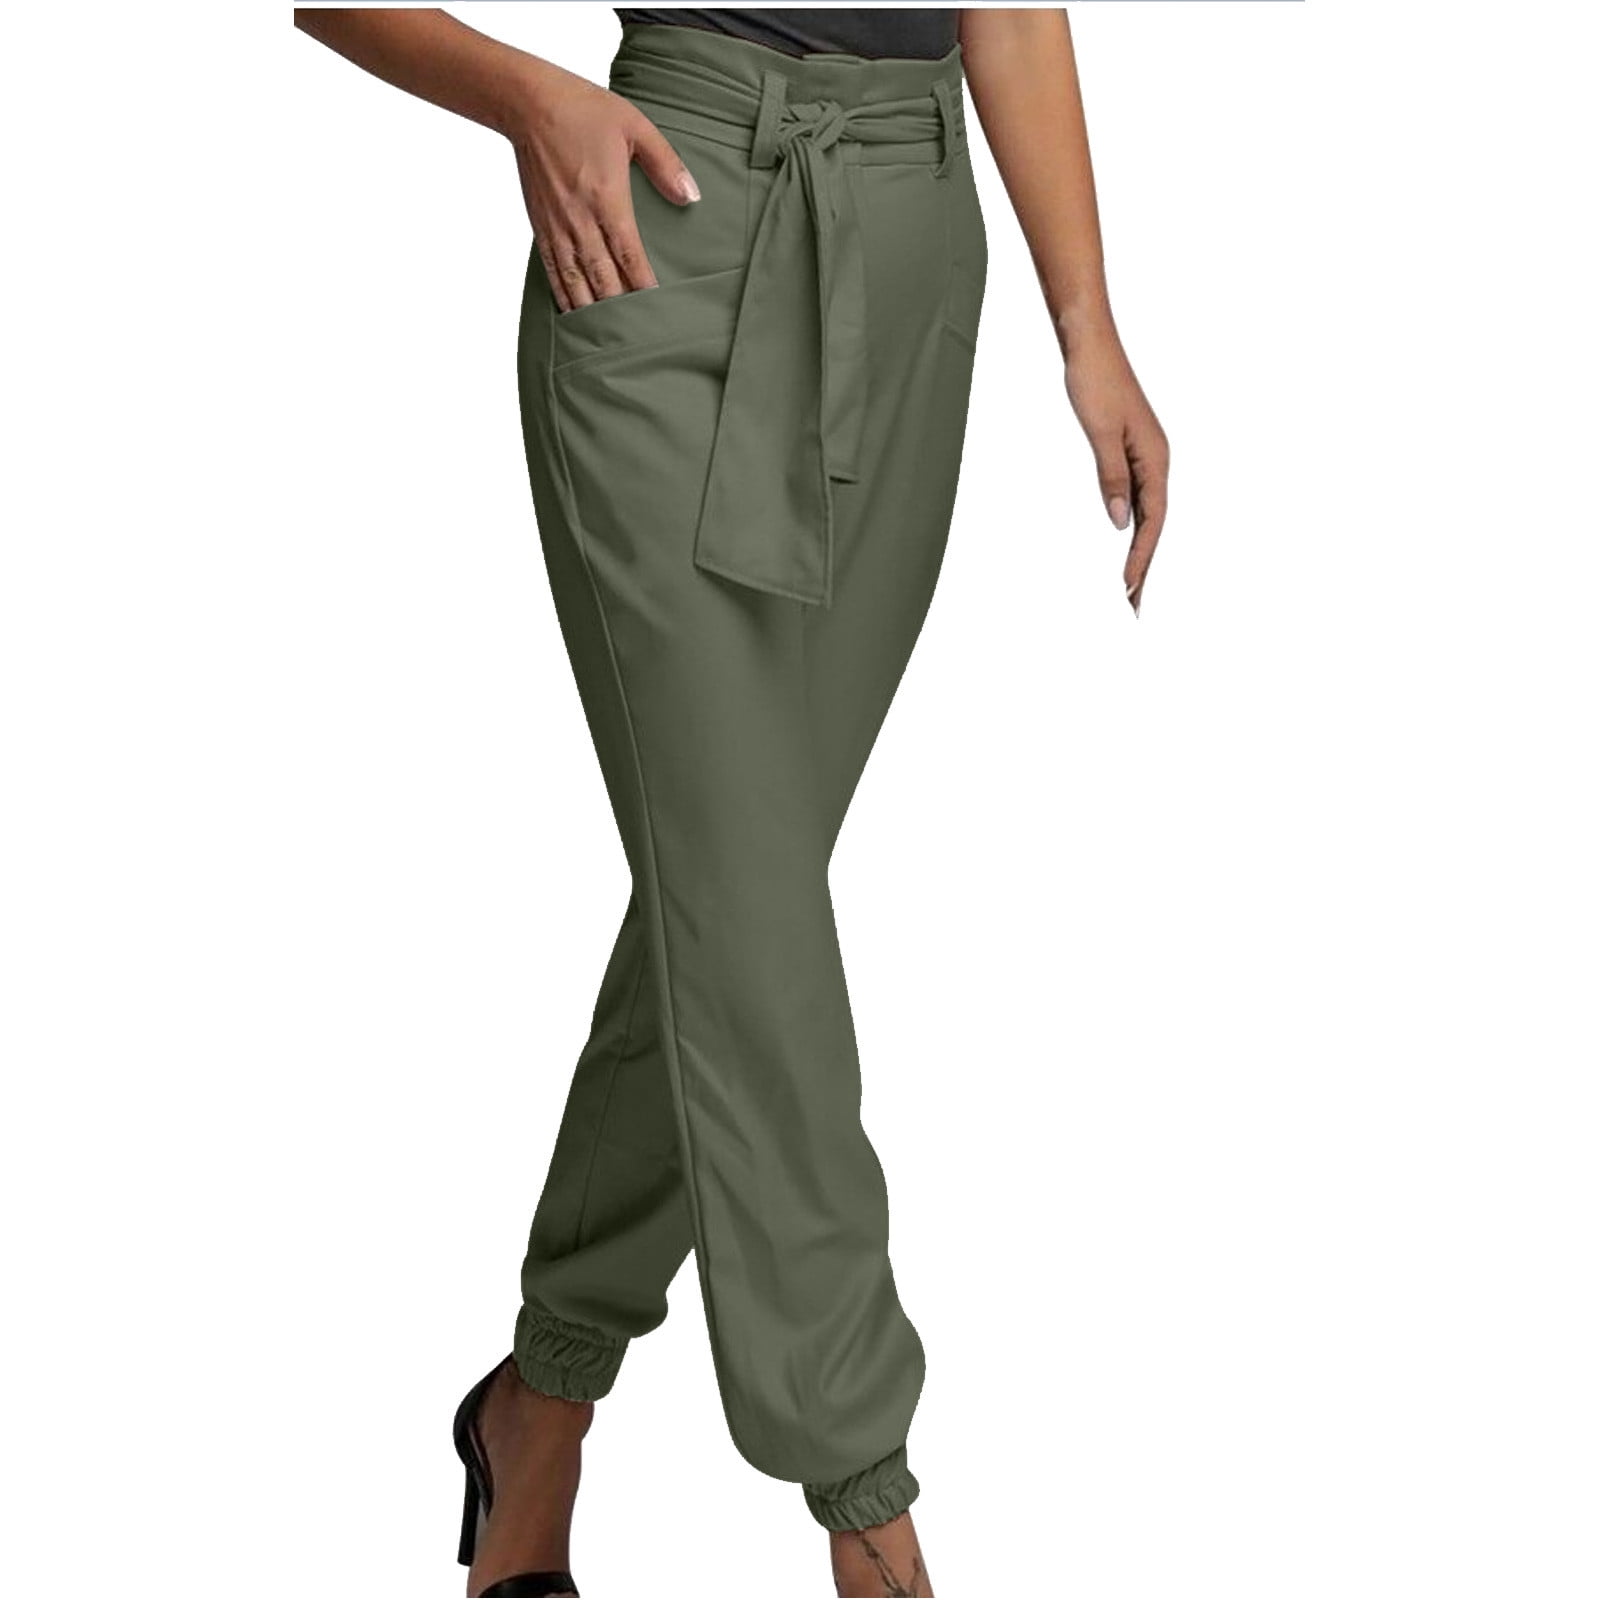 Women's Slim Capri Dress Pants, Stretchy Work Pants for Women, High Waist  Business Casual Golf Pants with Pockets